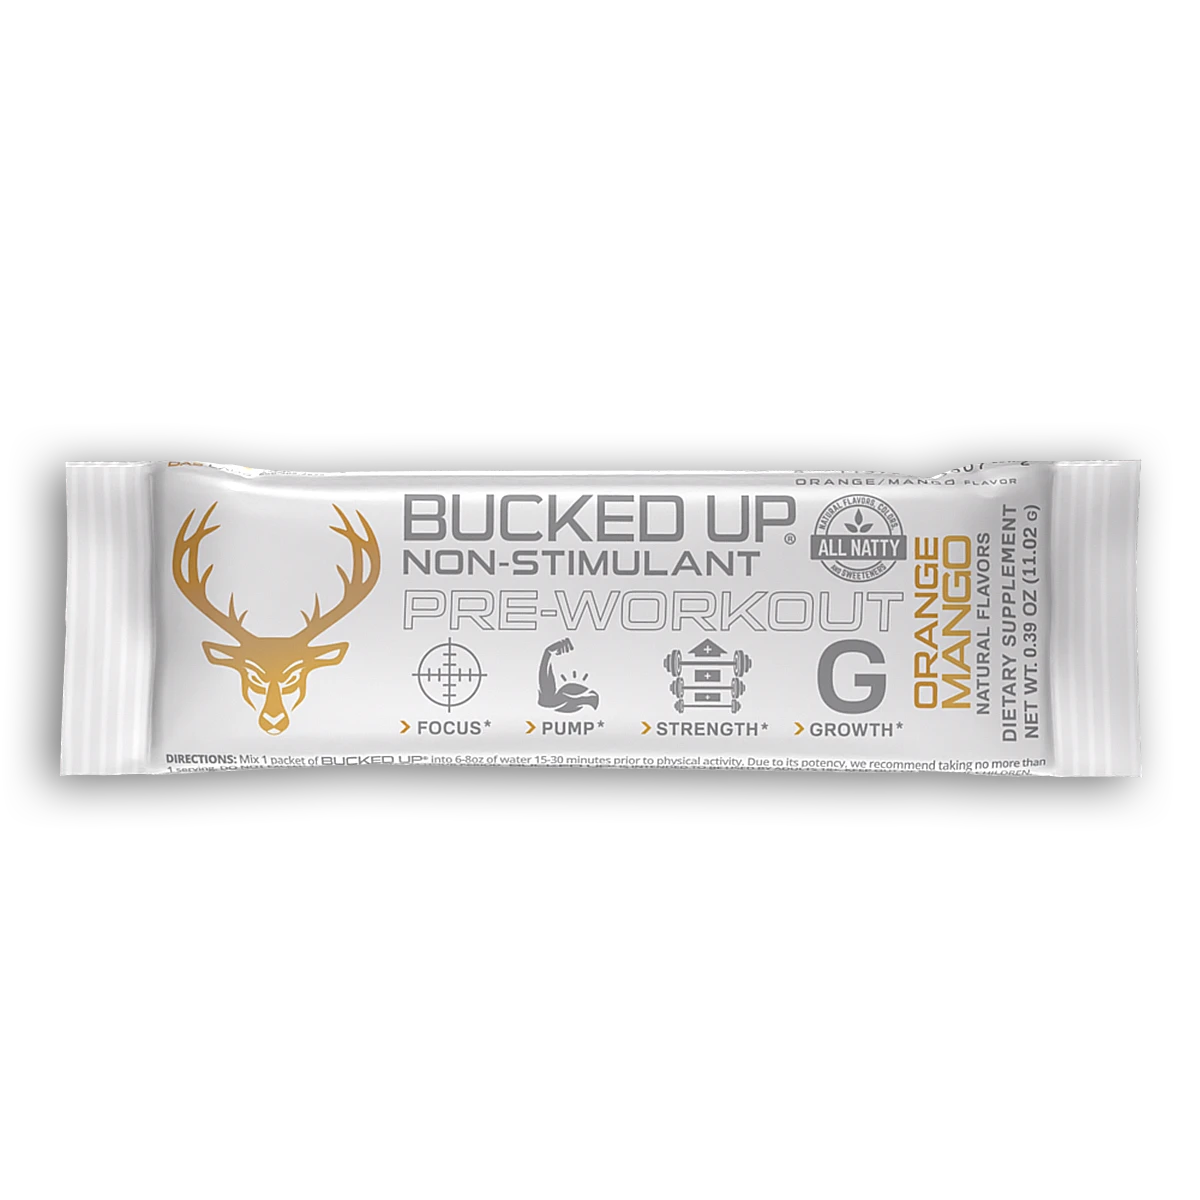 A Bucked Up Shirt, Shaker Bottle, and 5 Stick Packs of our best sellin, bucked  up free samples